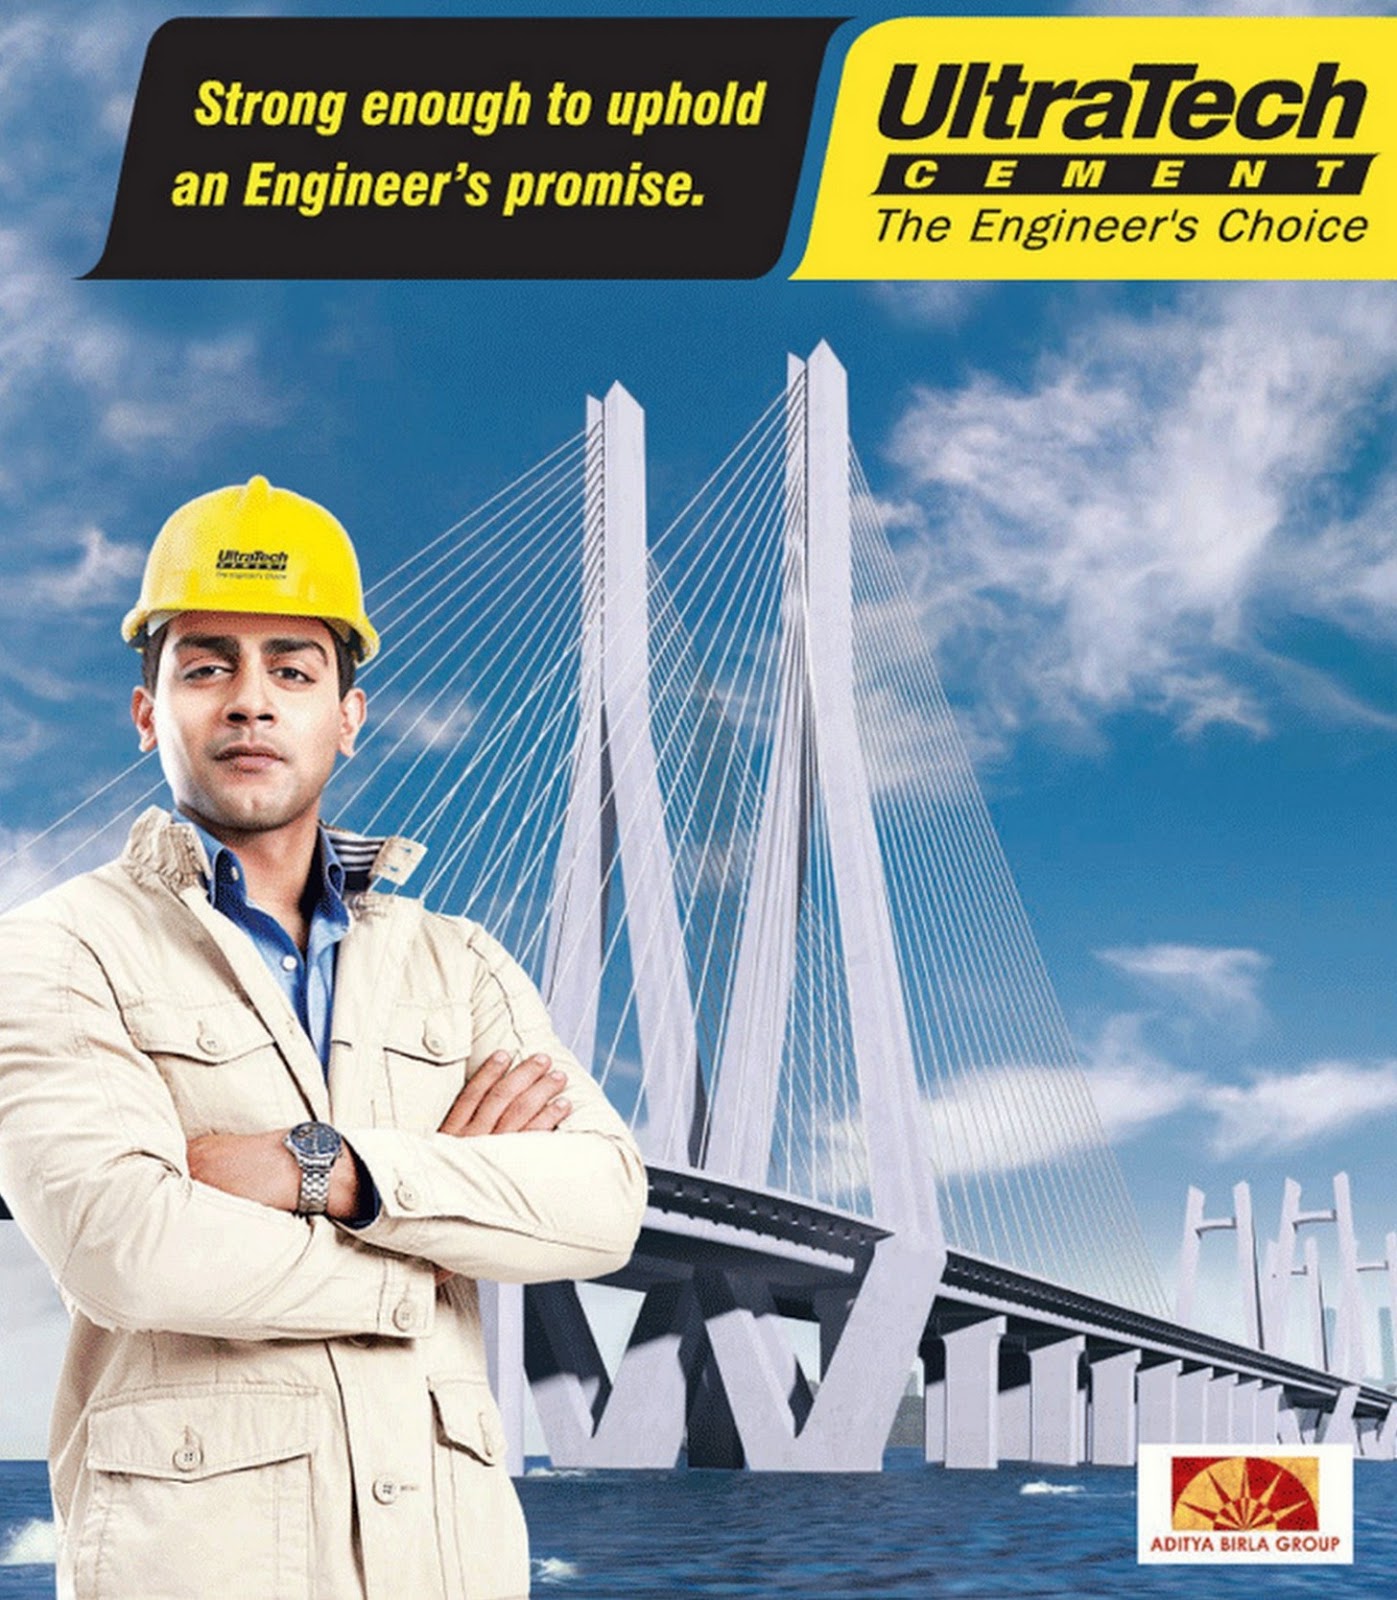 ULTRA TECH CEMENT JOB RECRUITMENT FOR CIVIL ENGINEERS IN VARIOUS